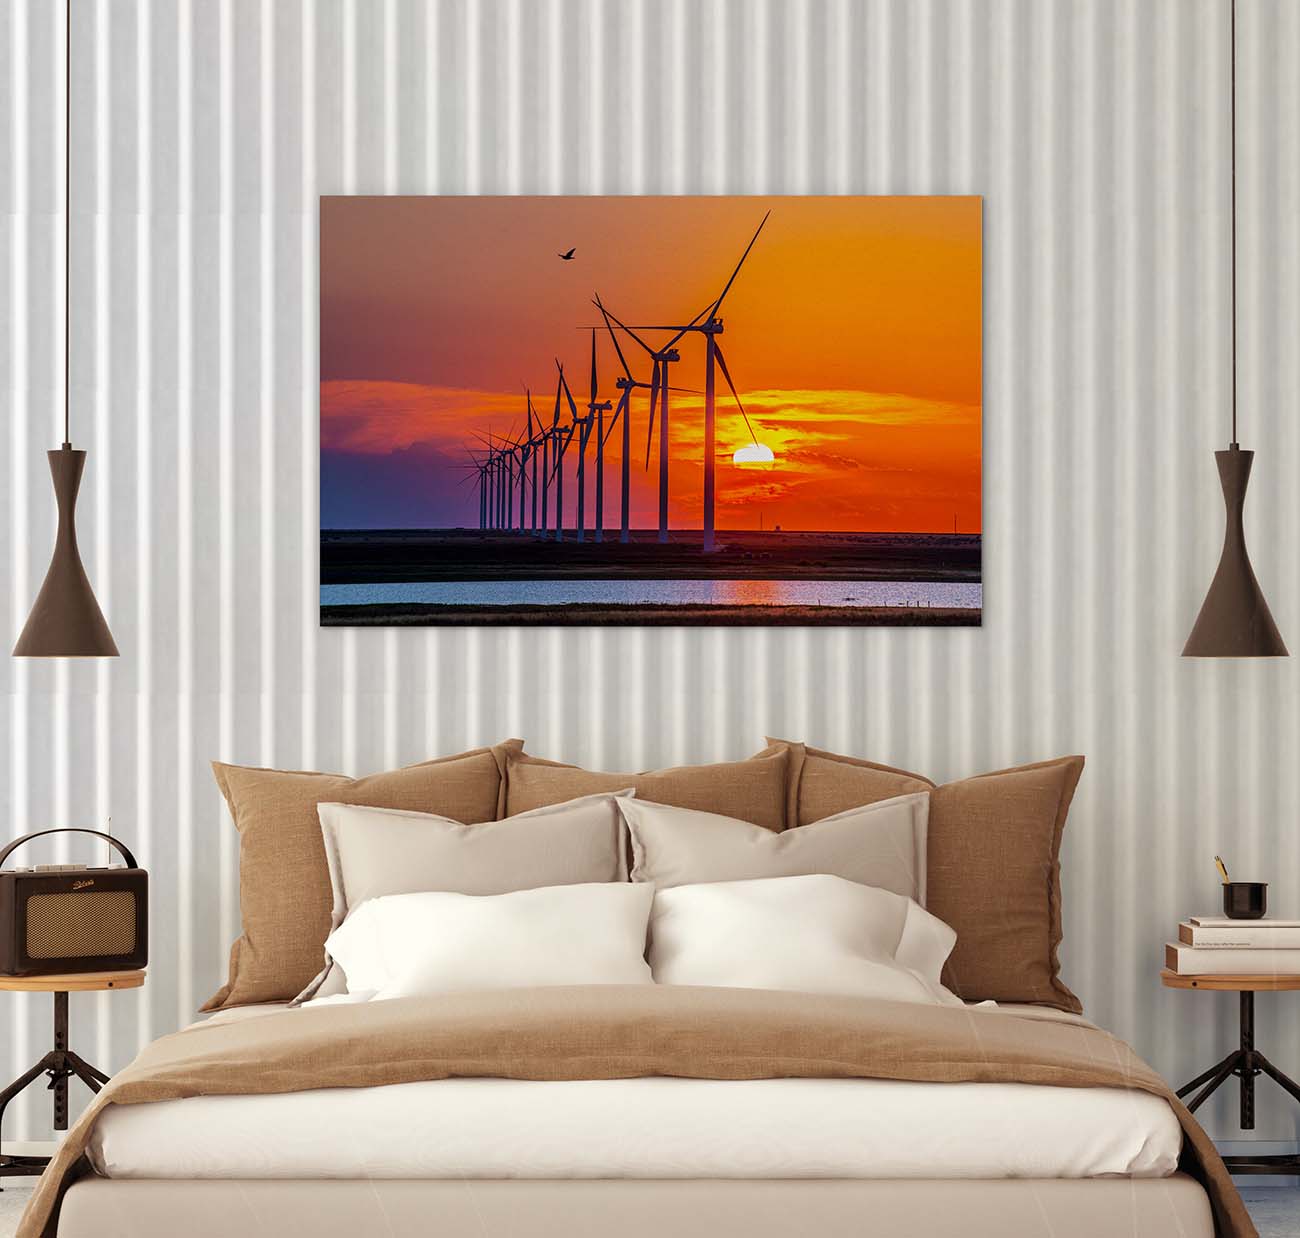 Sunset Turbines photograph by Doug LaRuenlarge print over a fluffy bed